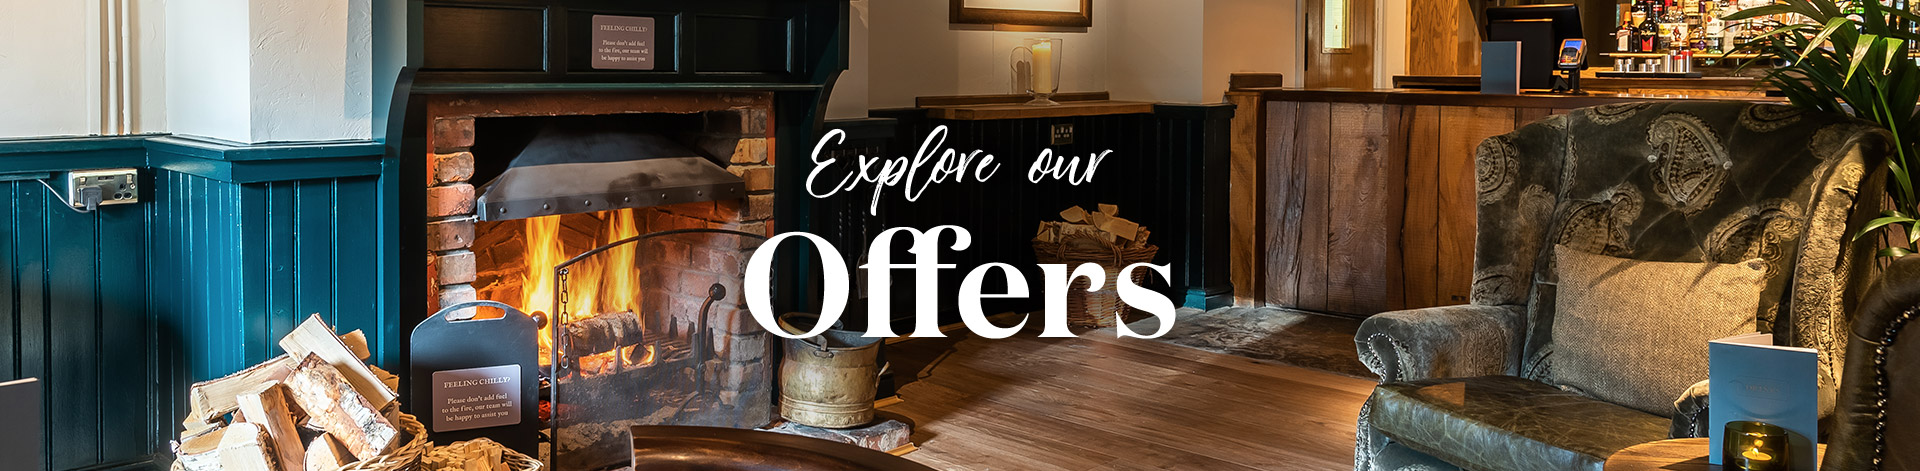 Our latest offers at The Swan Holme